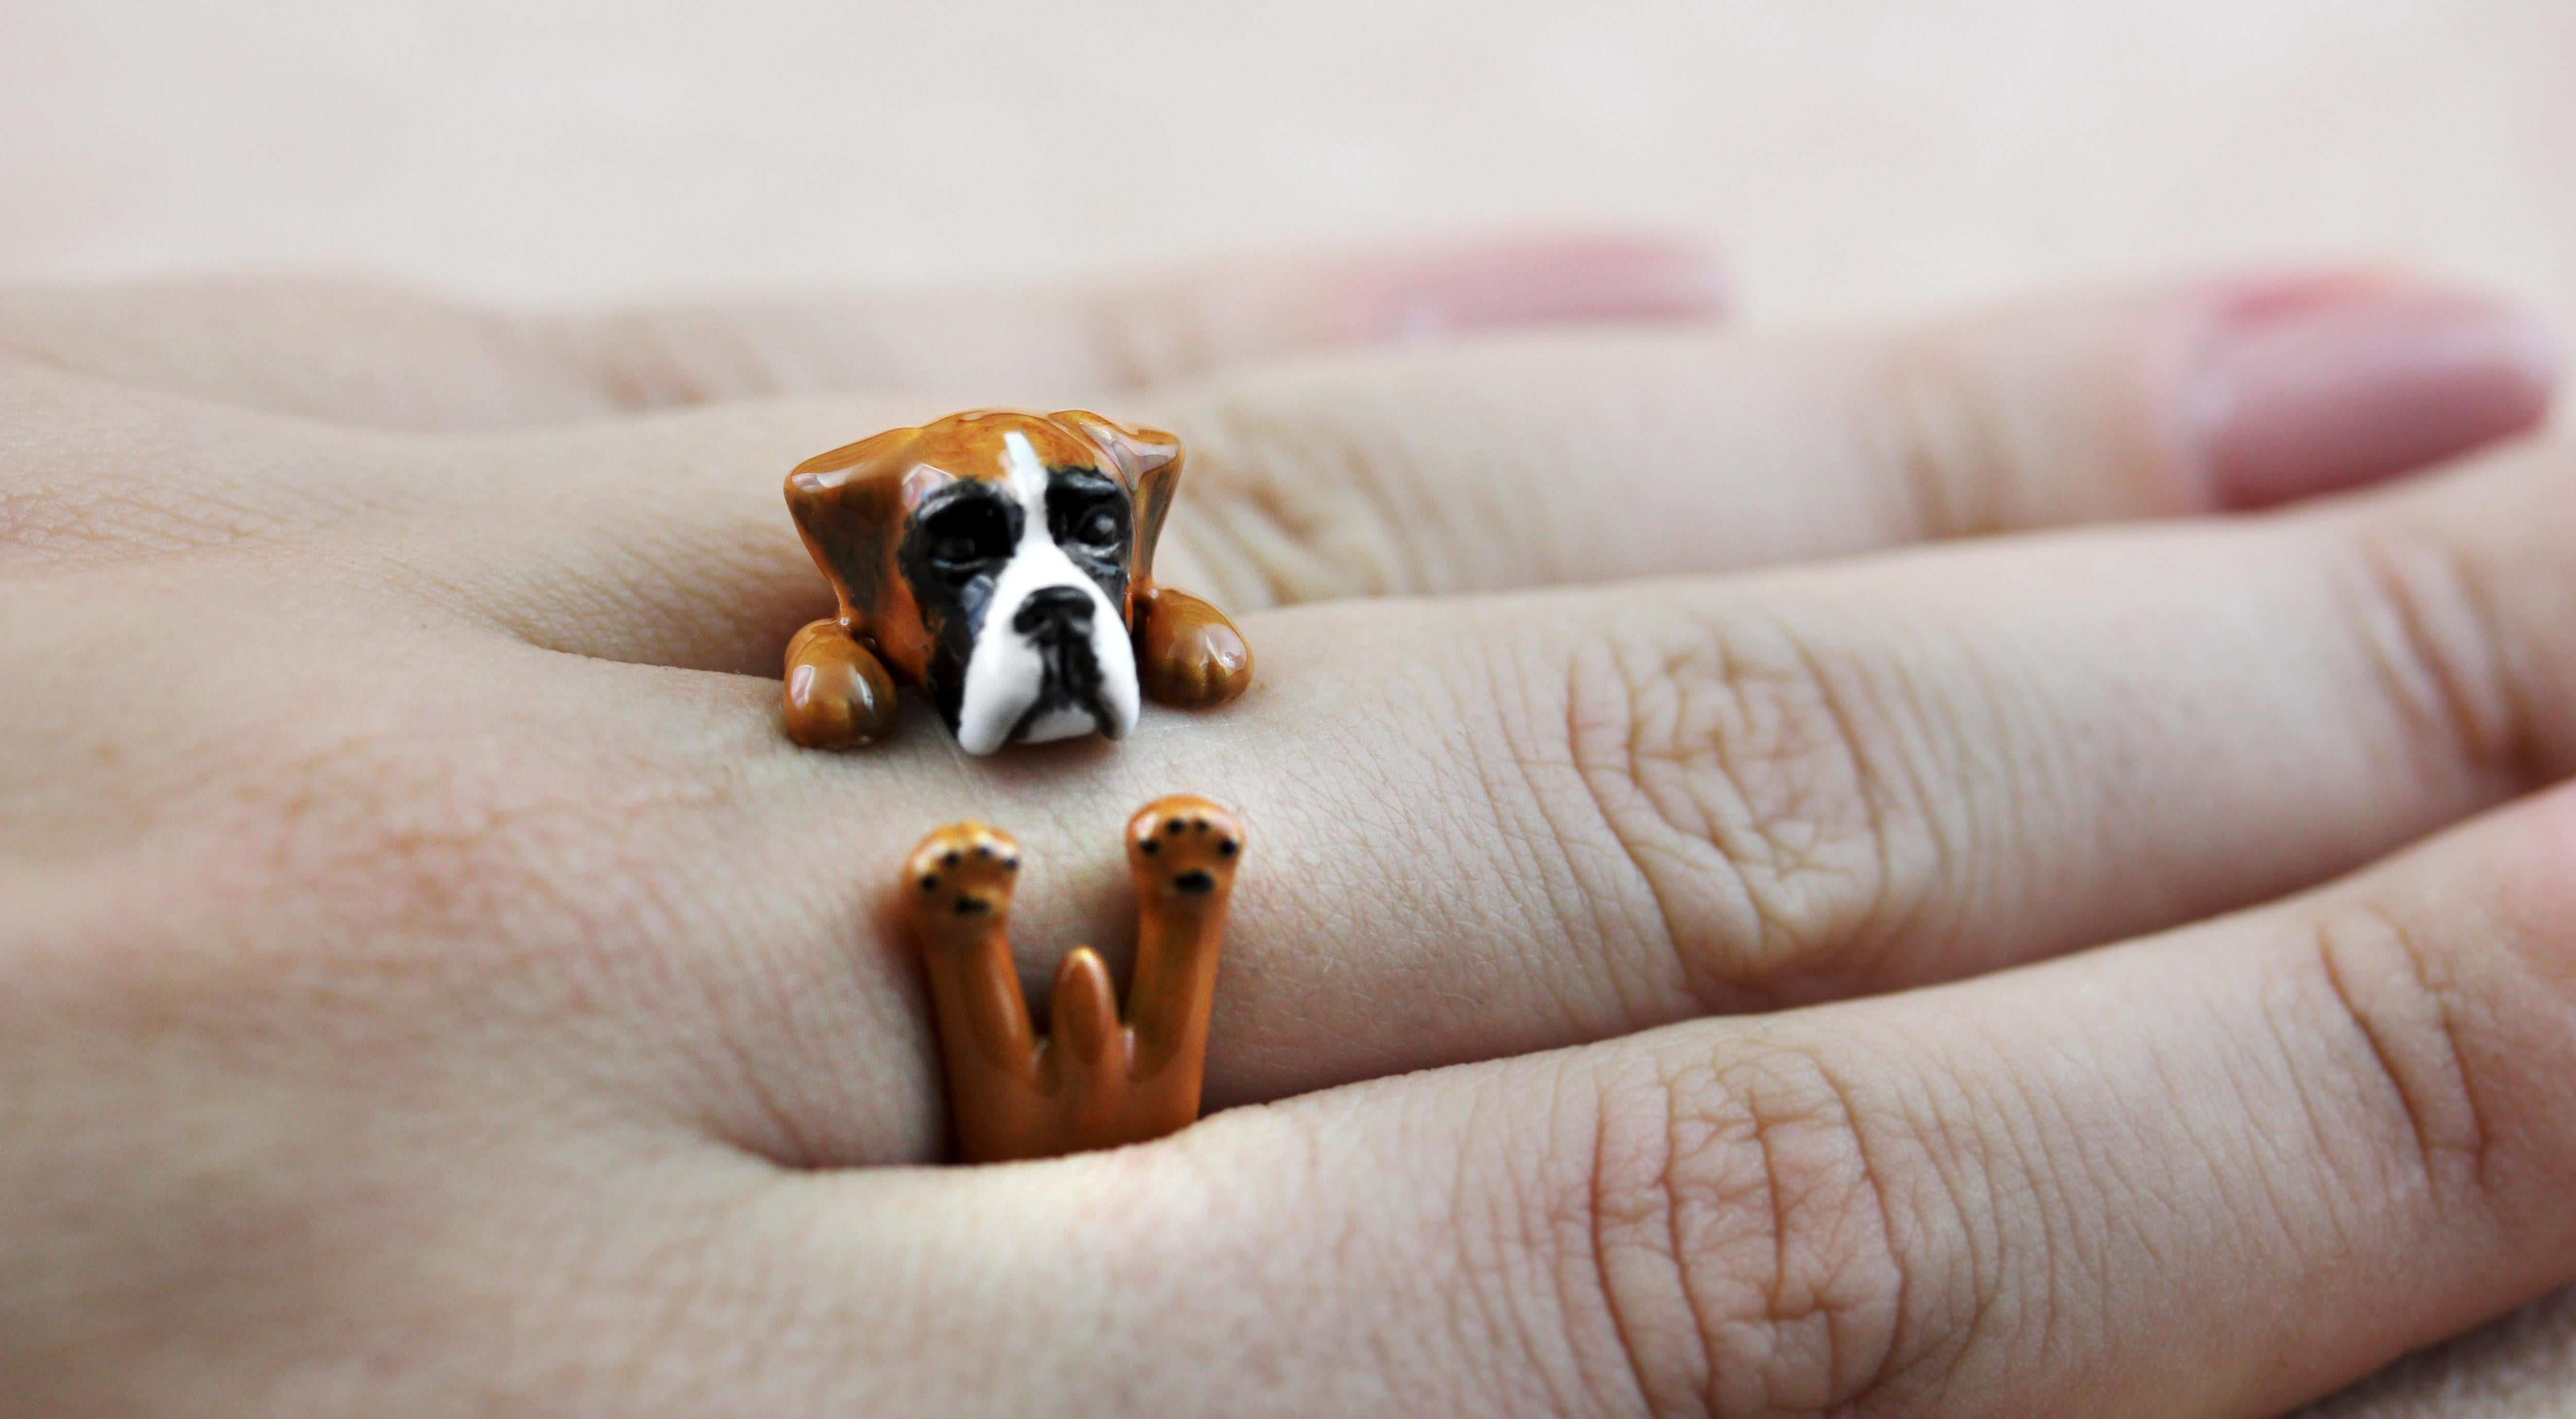 Ring made in sterling silver 925 featuring a Boxer, thanks to amazing hand enamel life-like features is vividly rendered.   

The AVGVSTA Dog ring is hand made and 100% customizable.  
We offer free engraving-perfect for dog's name or the owner of